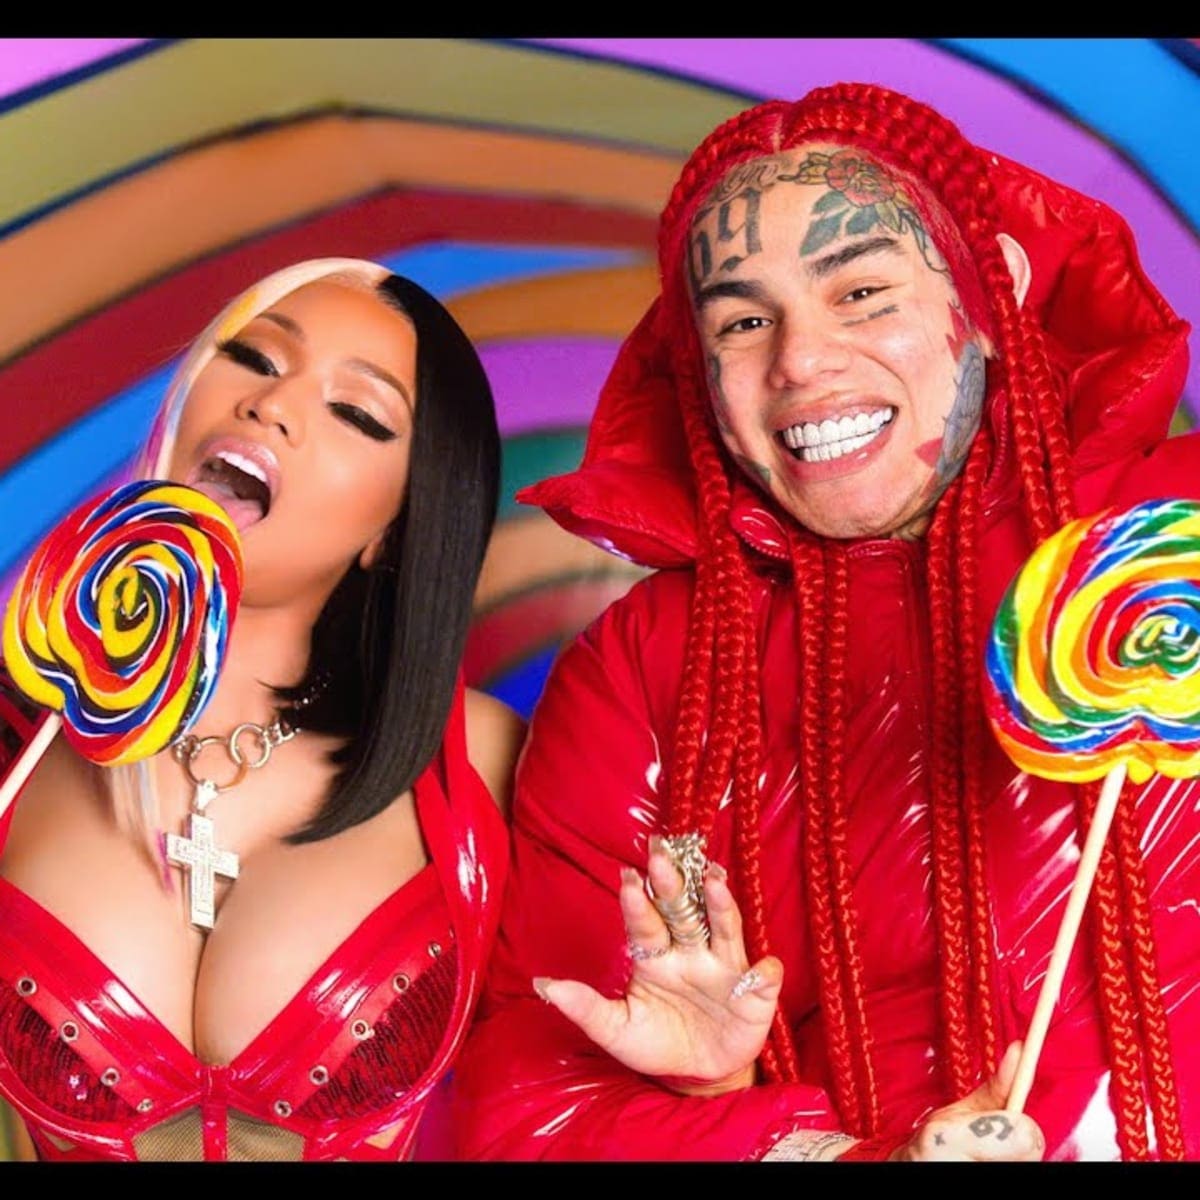 Nicki Minaj And Tekashi 69's New Video Makes History! It Gained The Most Views In Hip-Hop In Less Than 24 Hours